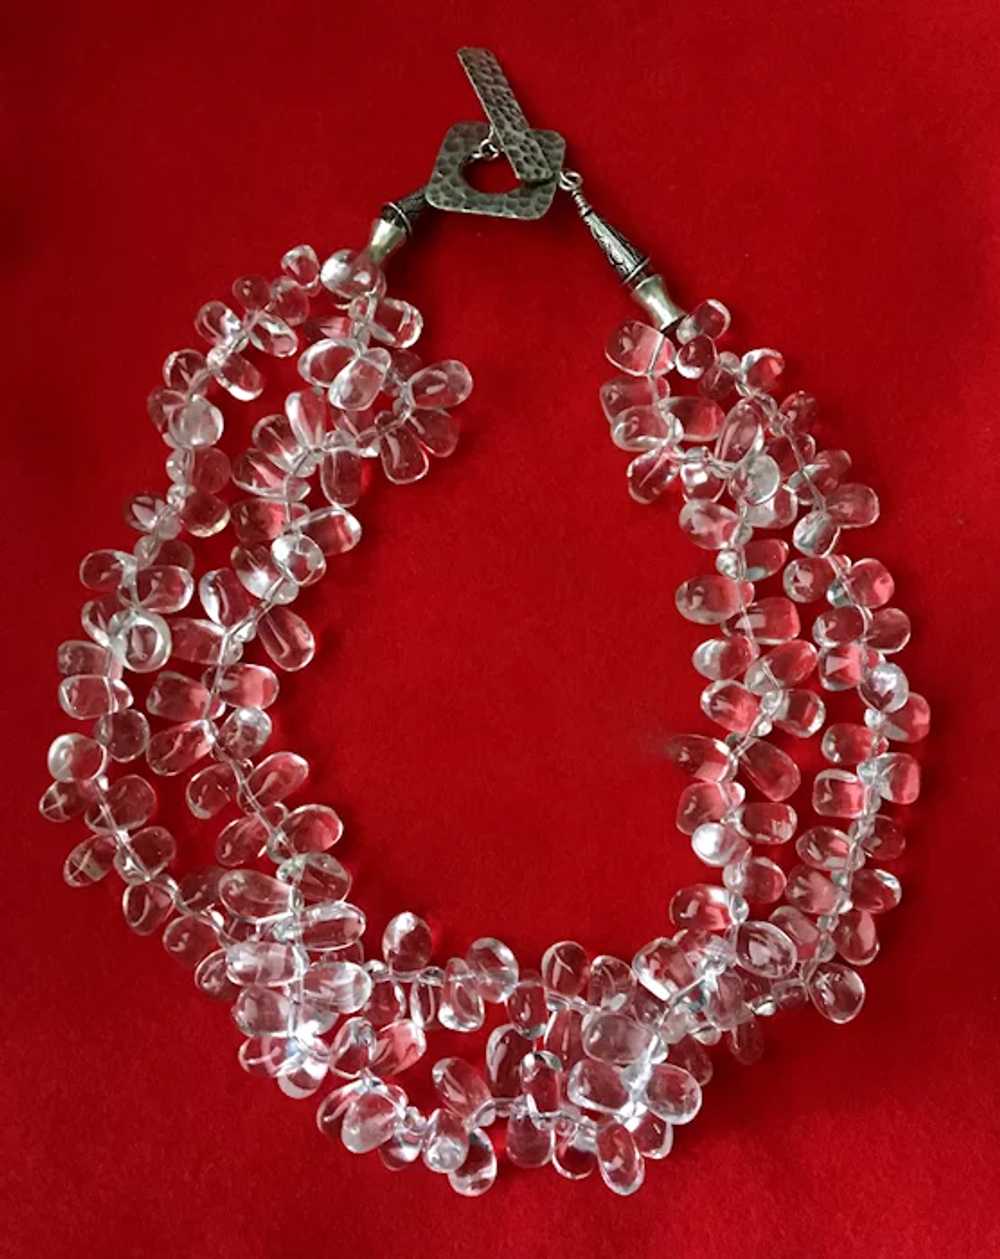 Chunky Rock Crystal Wide Collar Necklace - image 2